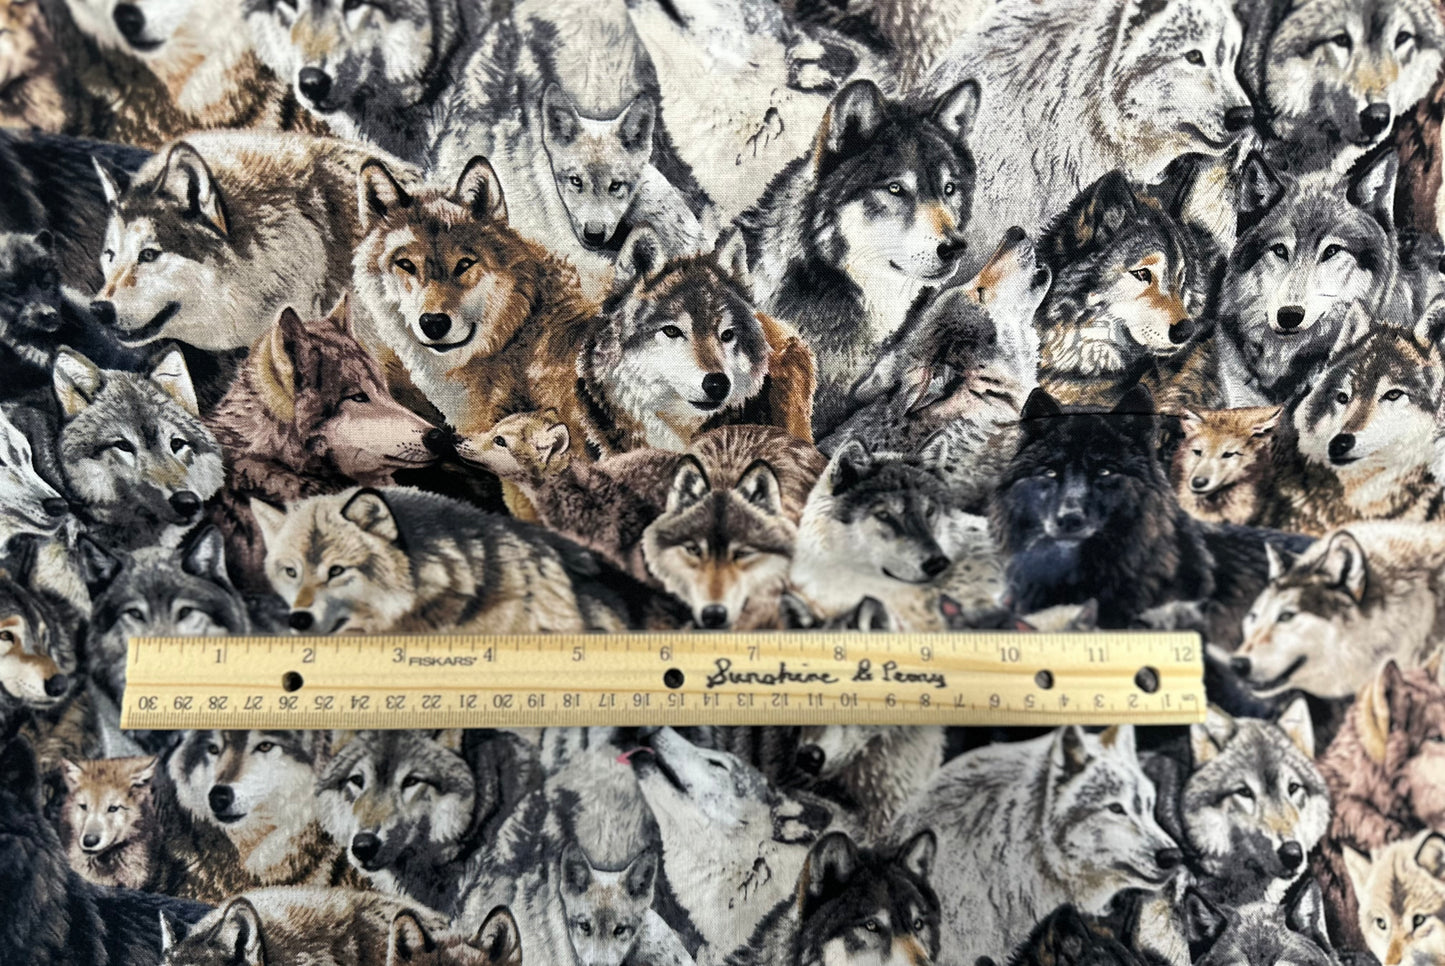 Elizabeths Studio - From Elizabeths Studio - Canis Lupus by Adam & Daniel Smith Collection - Packed Wolves